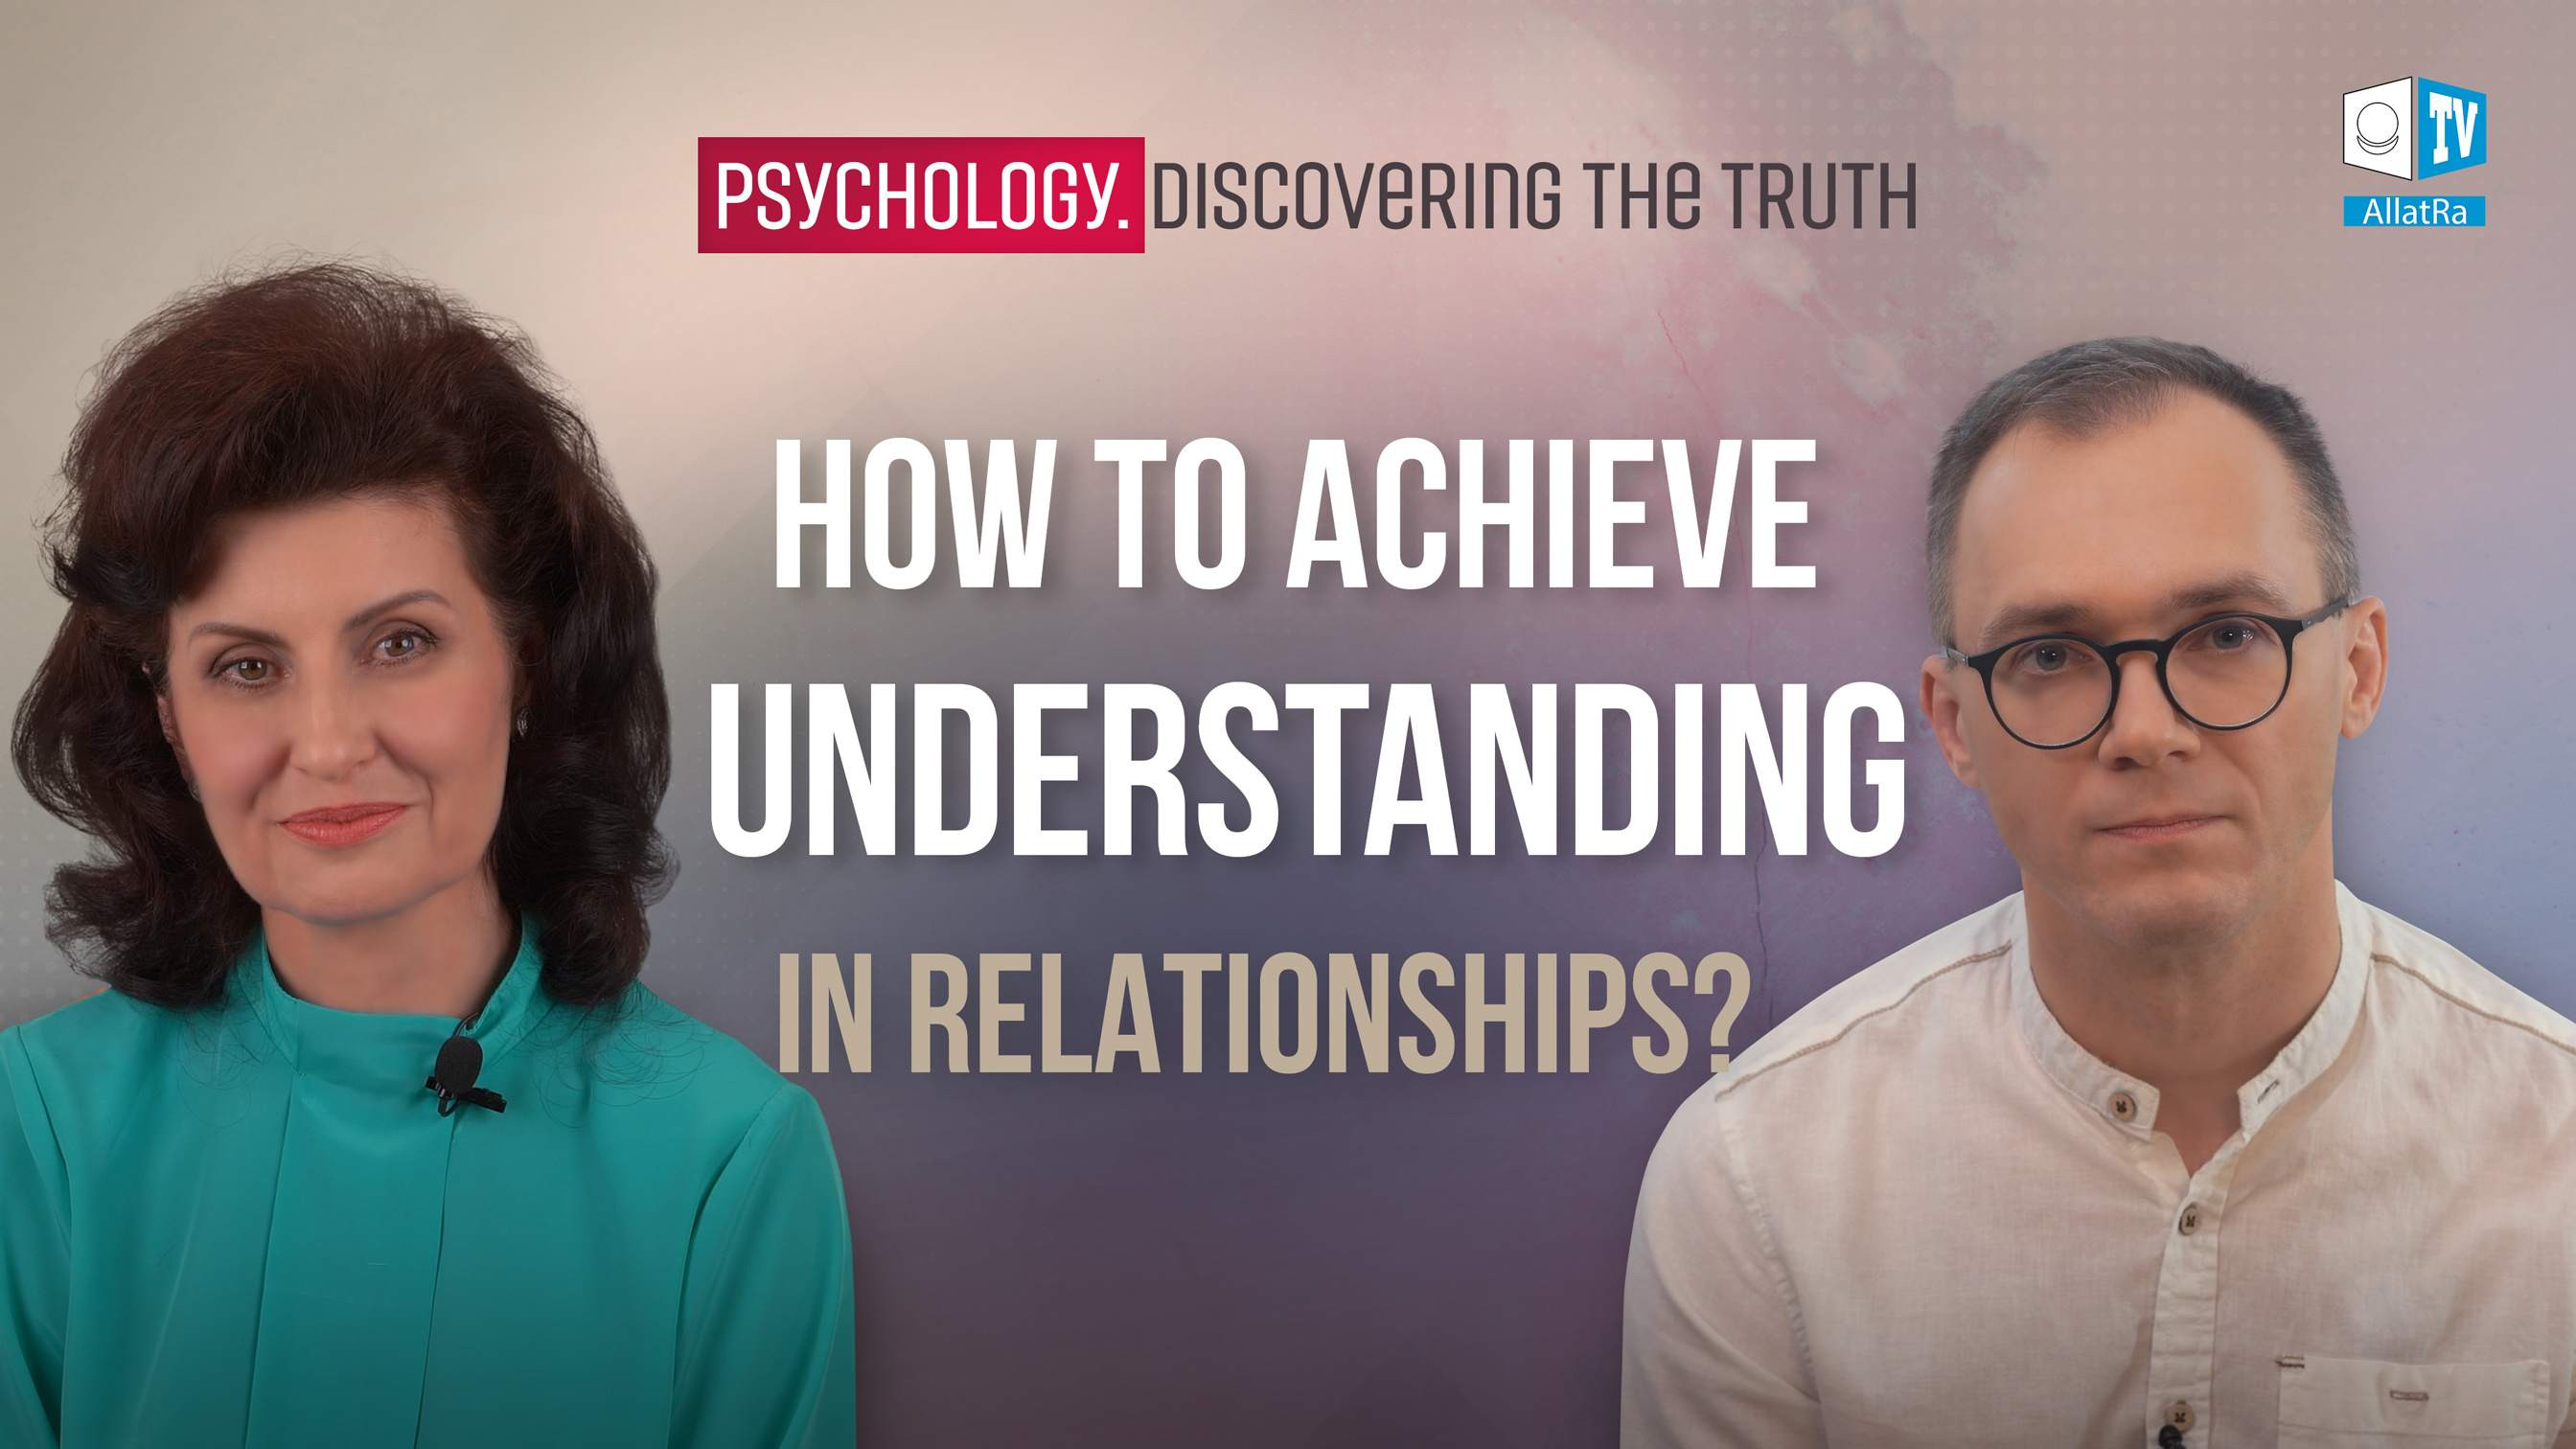 Relationships as They Are, and What They Can Be Like. Psychology. Discovering the Truth